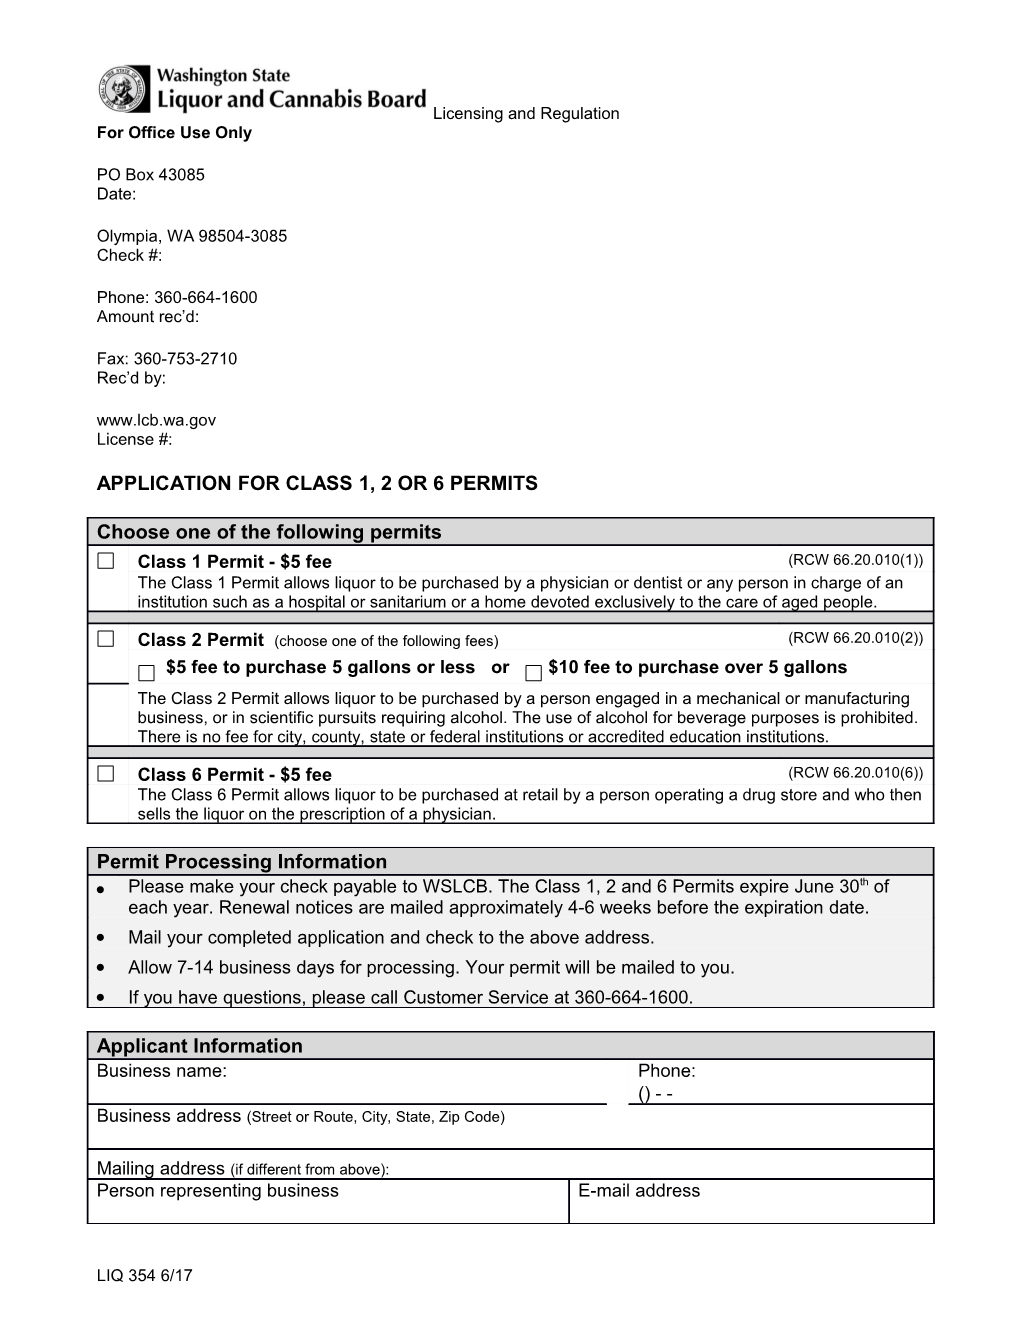 Sample Class 1 2 6 Application for Class 1 2 Or 6 Permits s1